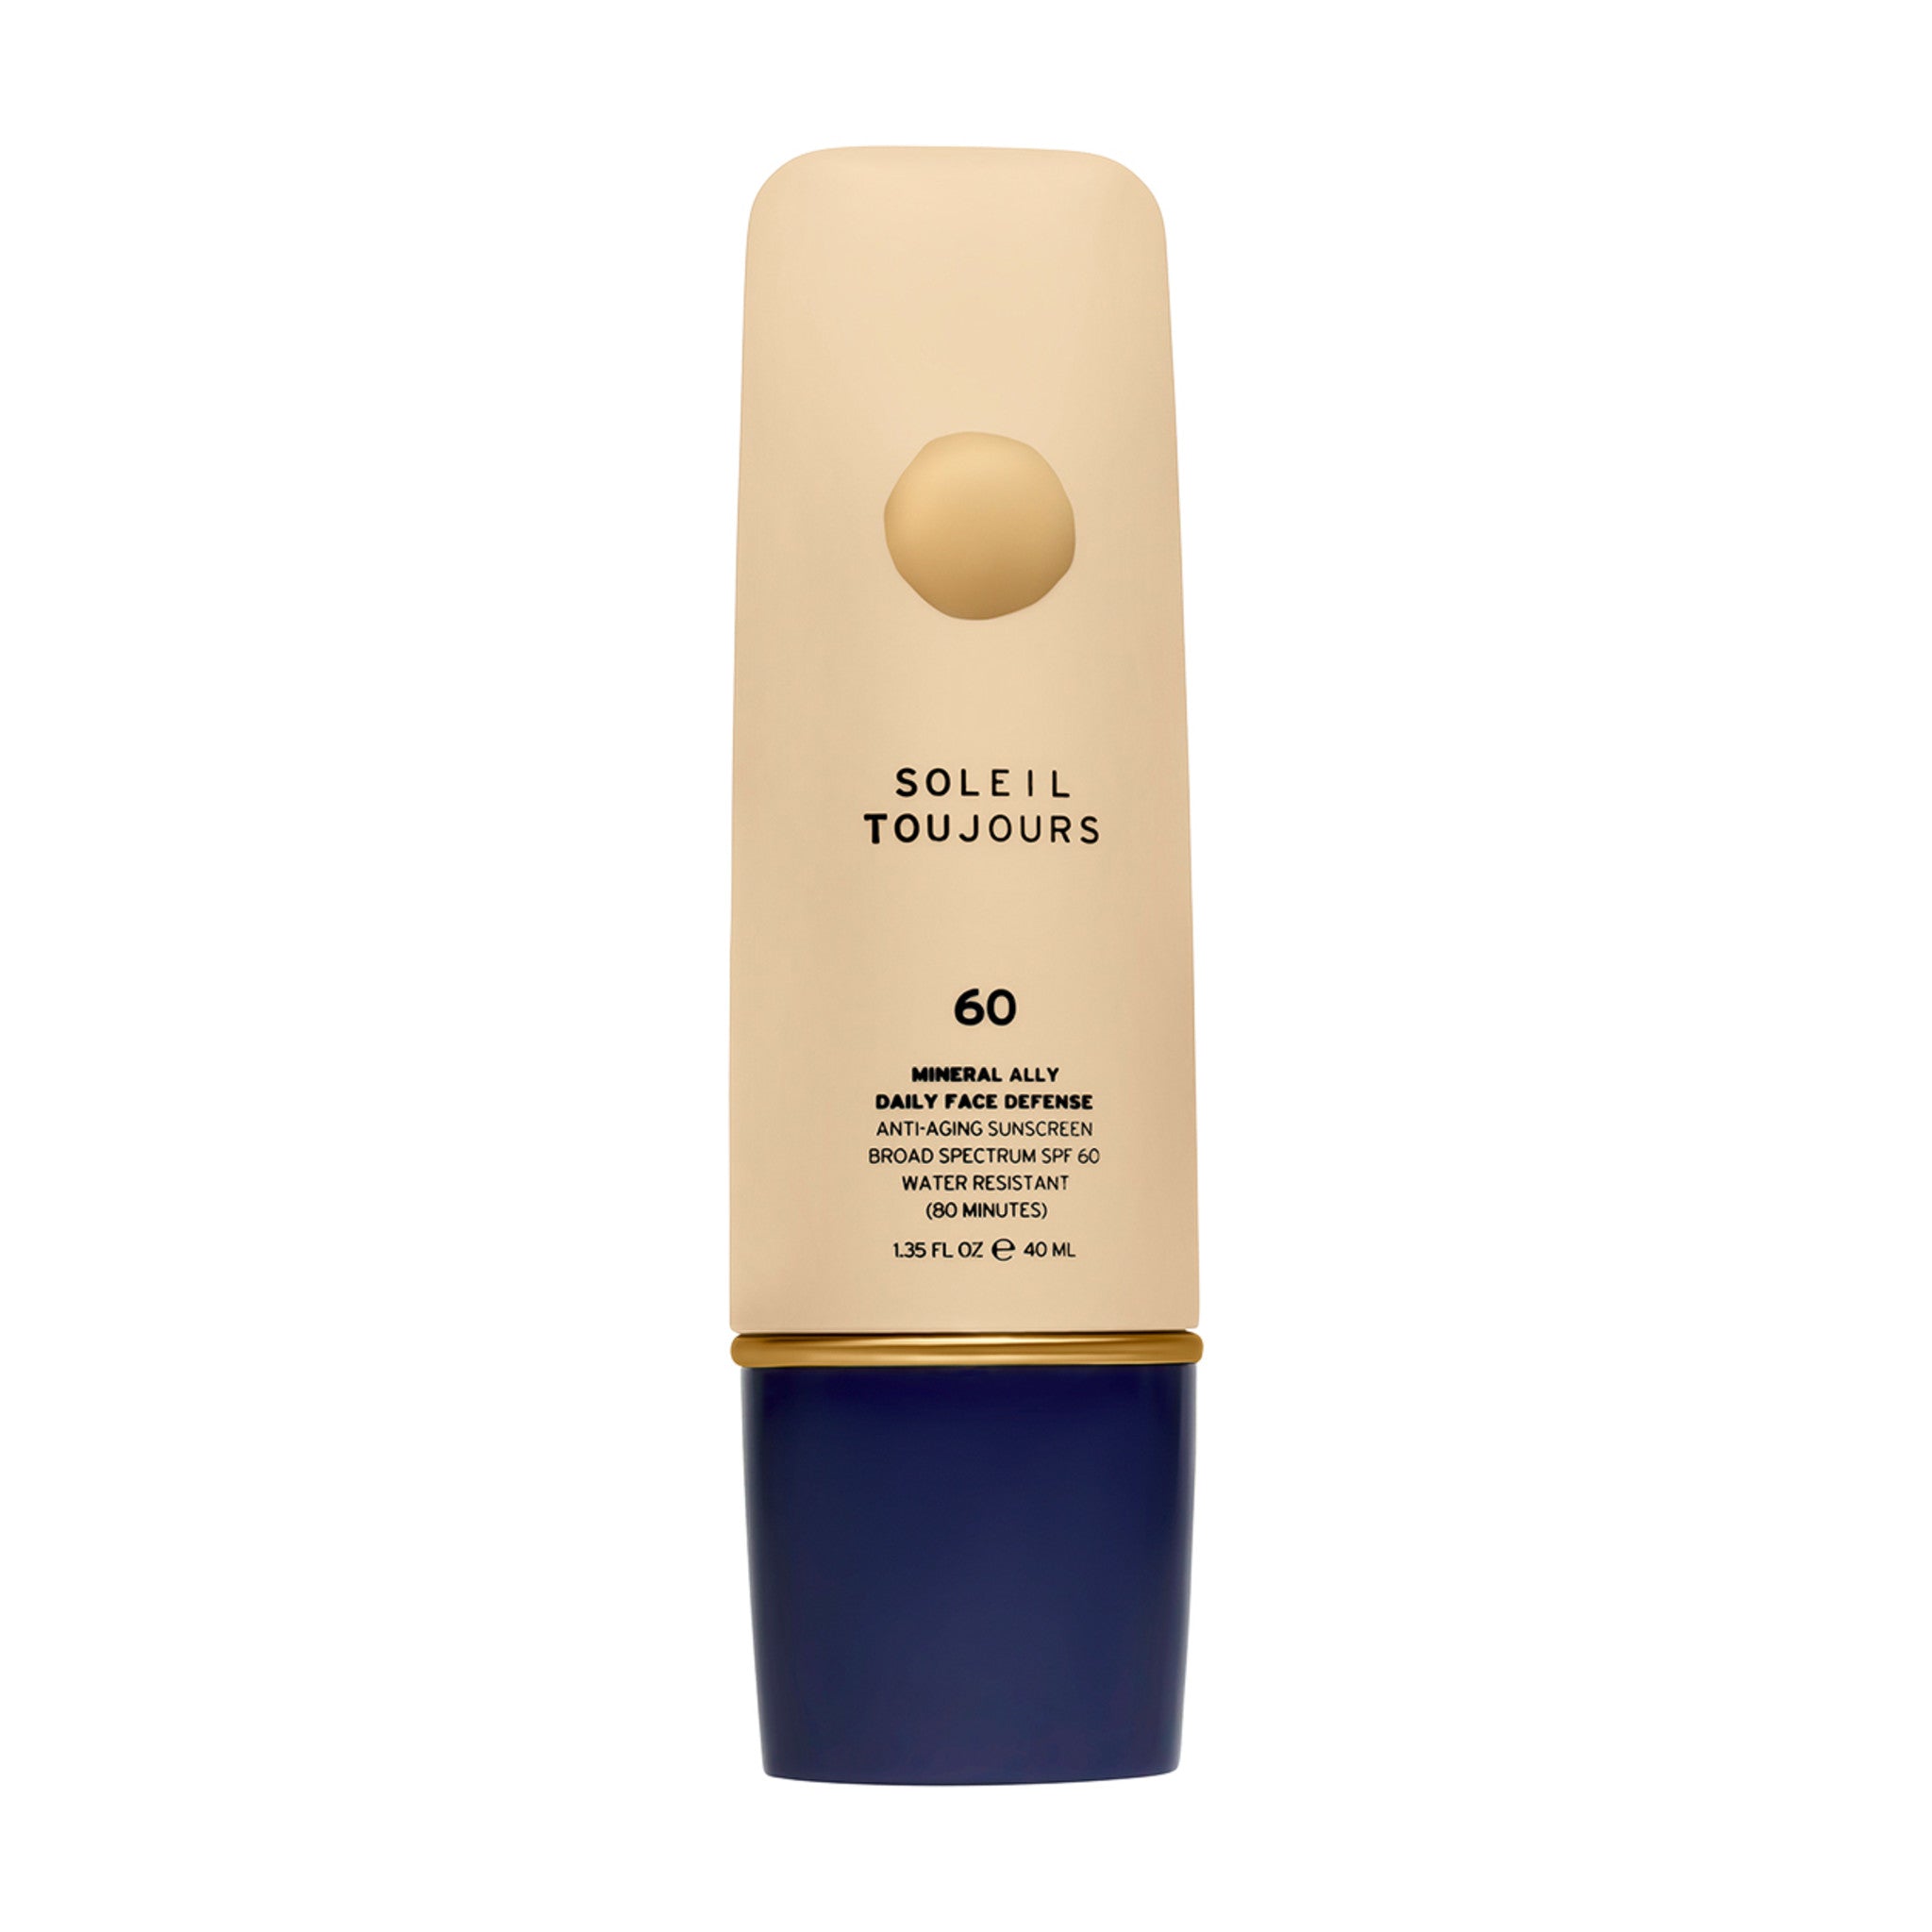 Soleil Toujours Mineral Ally Daily Face Defense SPF 60 main image.